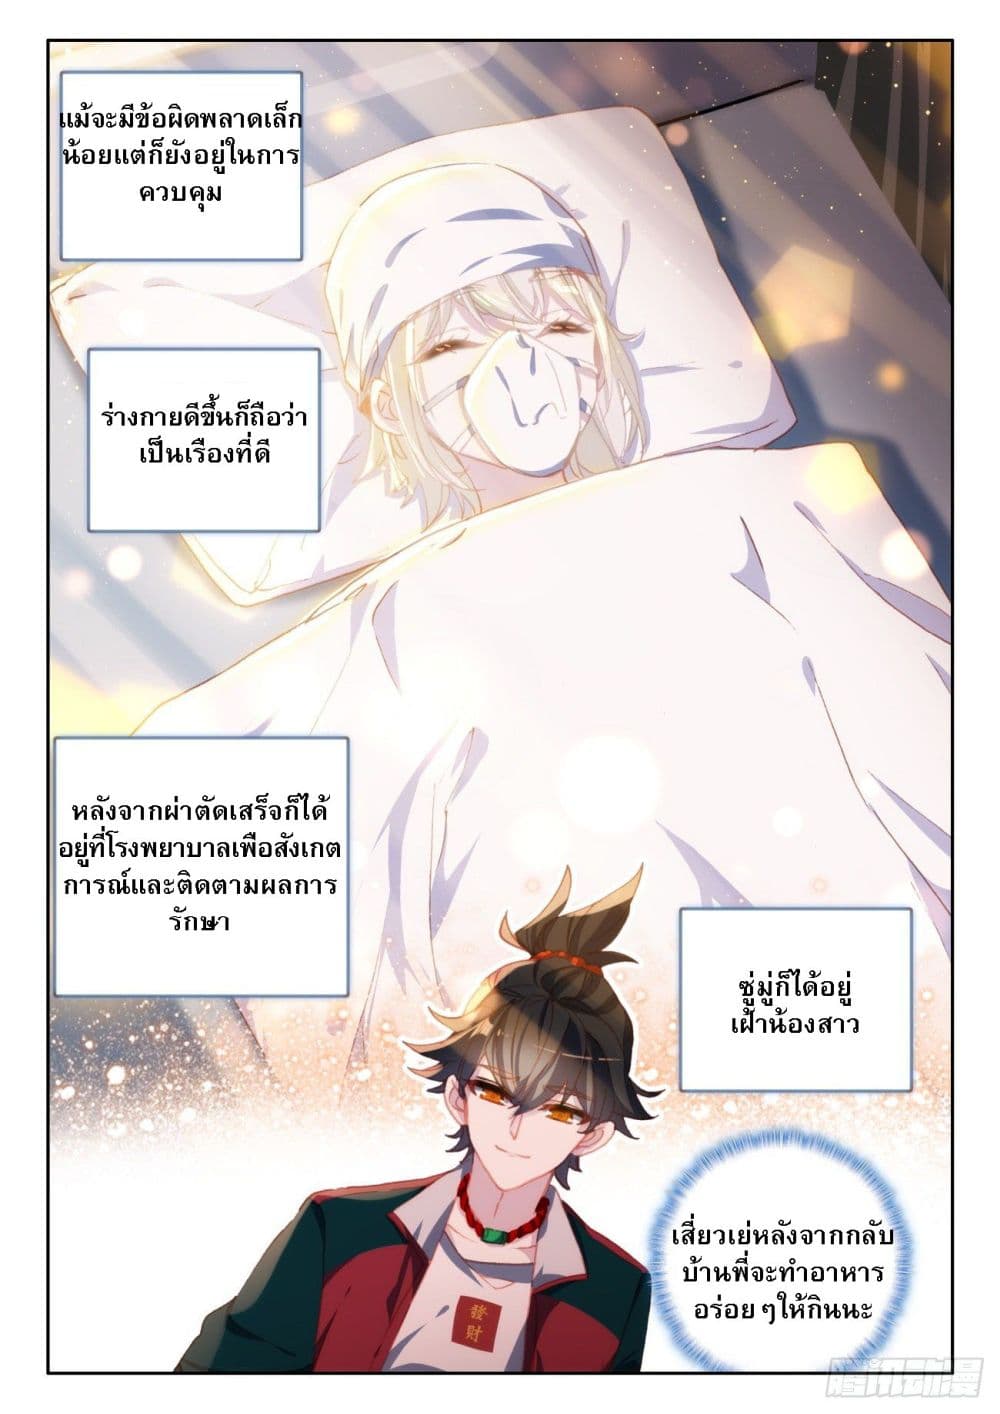 Becoming Immortal by Paying Cash ตอนที่ 8 (11)